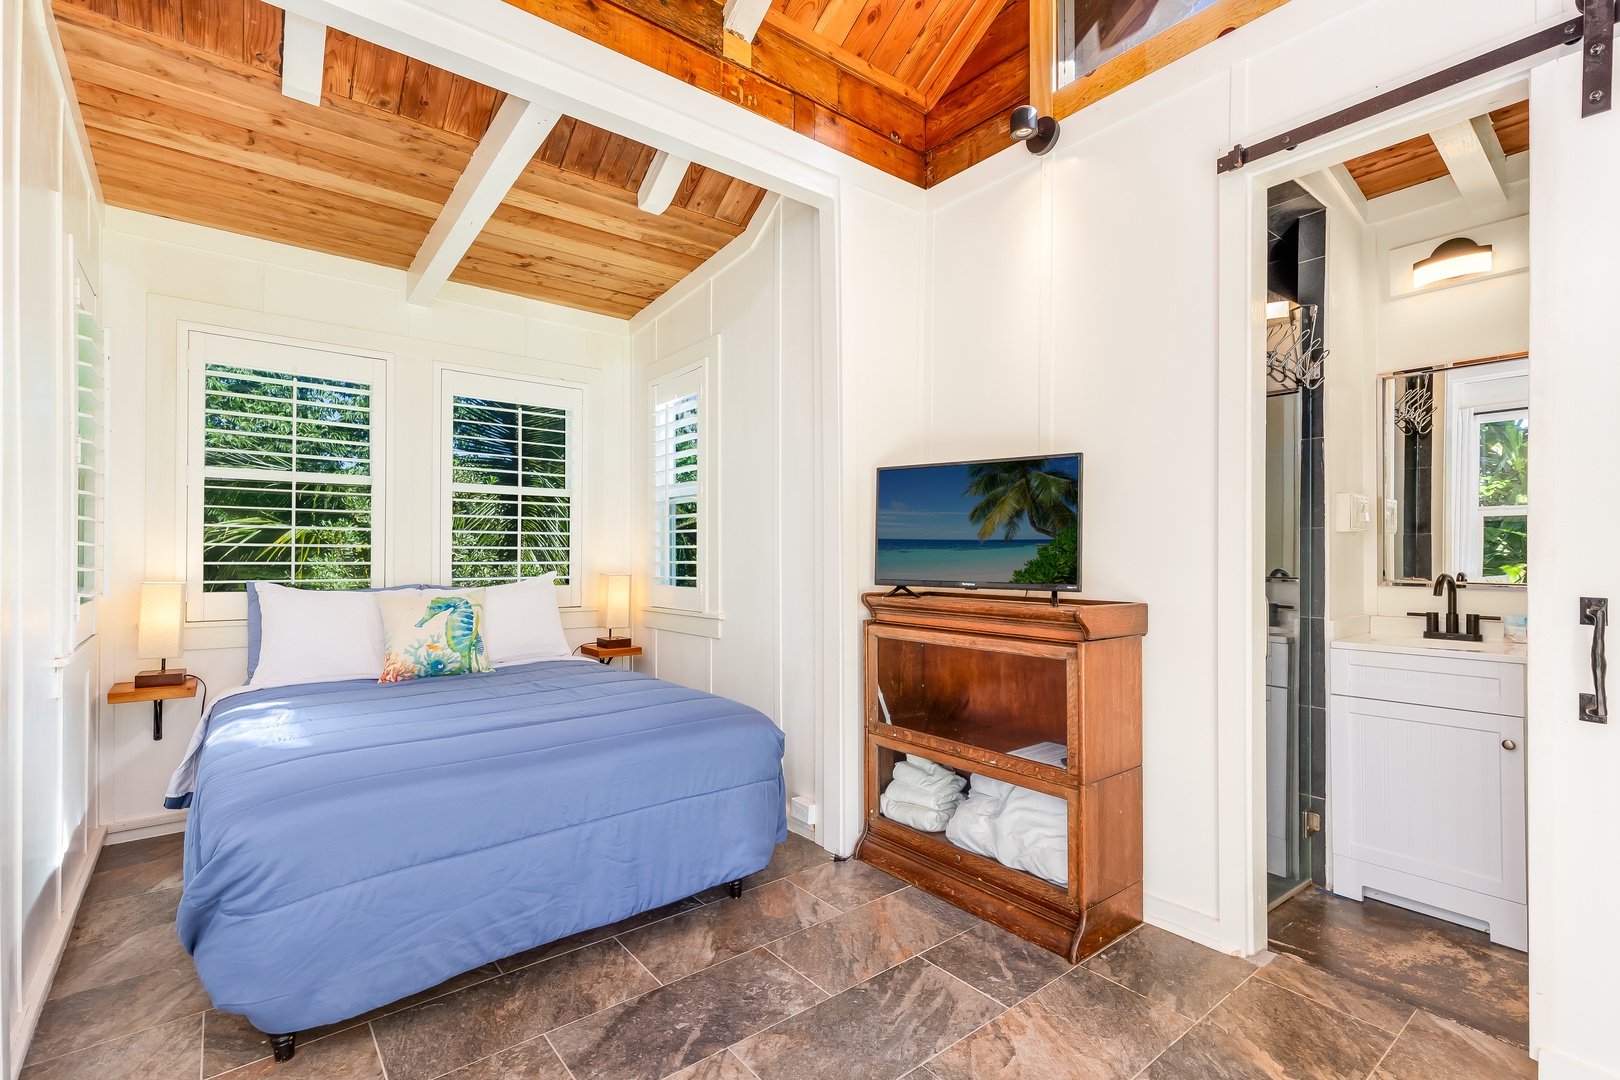 Haleiwa Vacation Rentals, Mele Makana - Guest bedroom 8 provides a Smart TV and private bathroom ensuite with shower stall